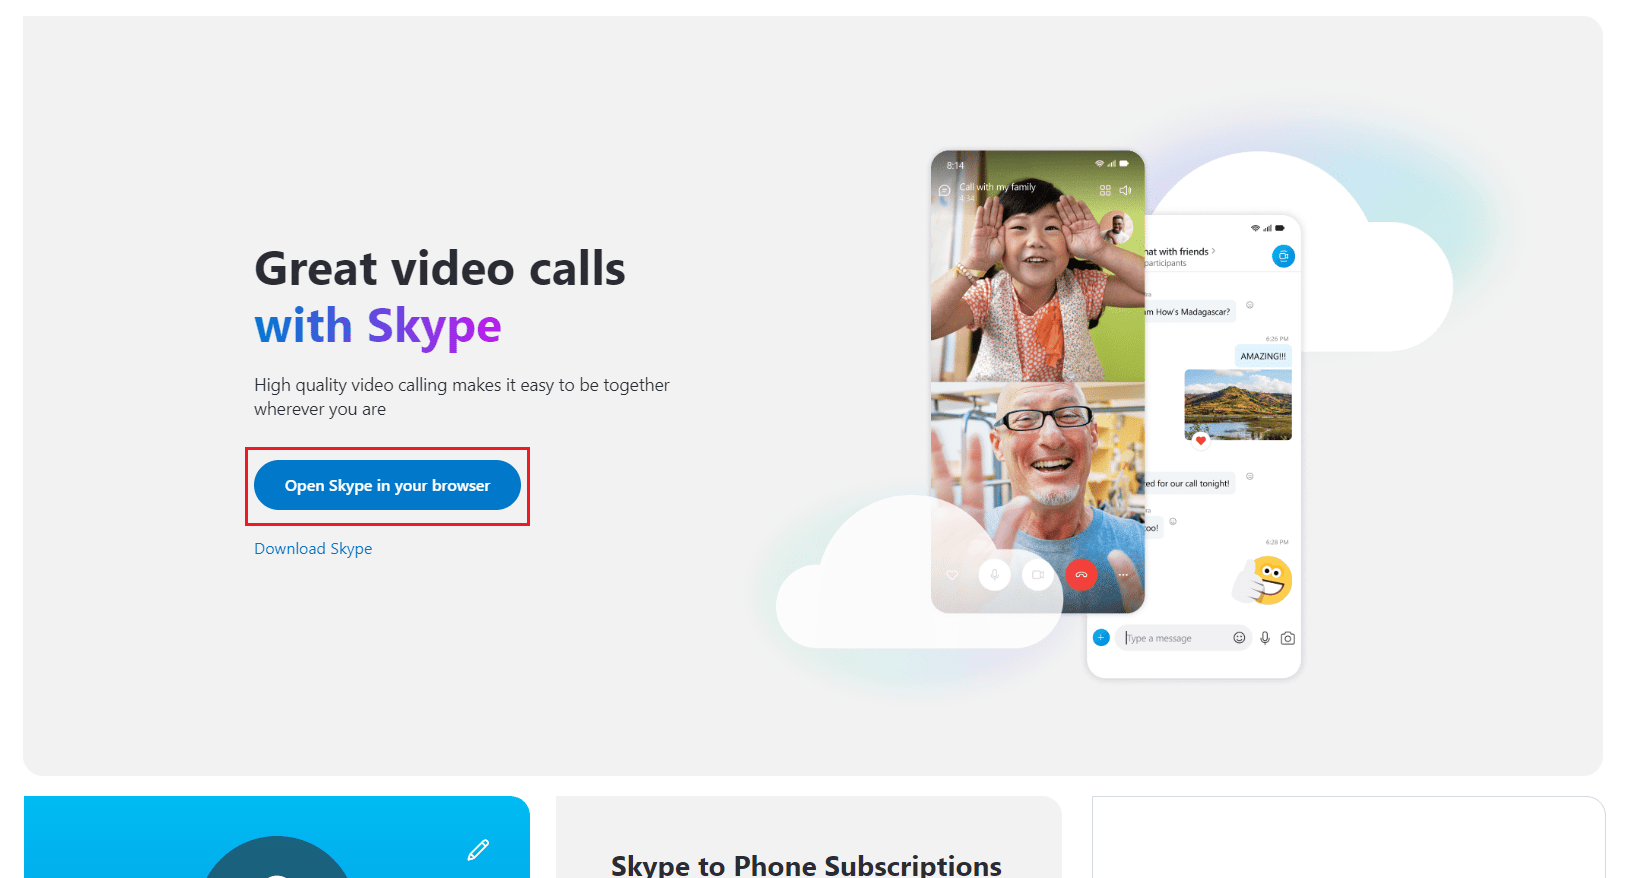 open Skype in your browser